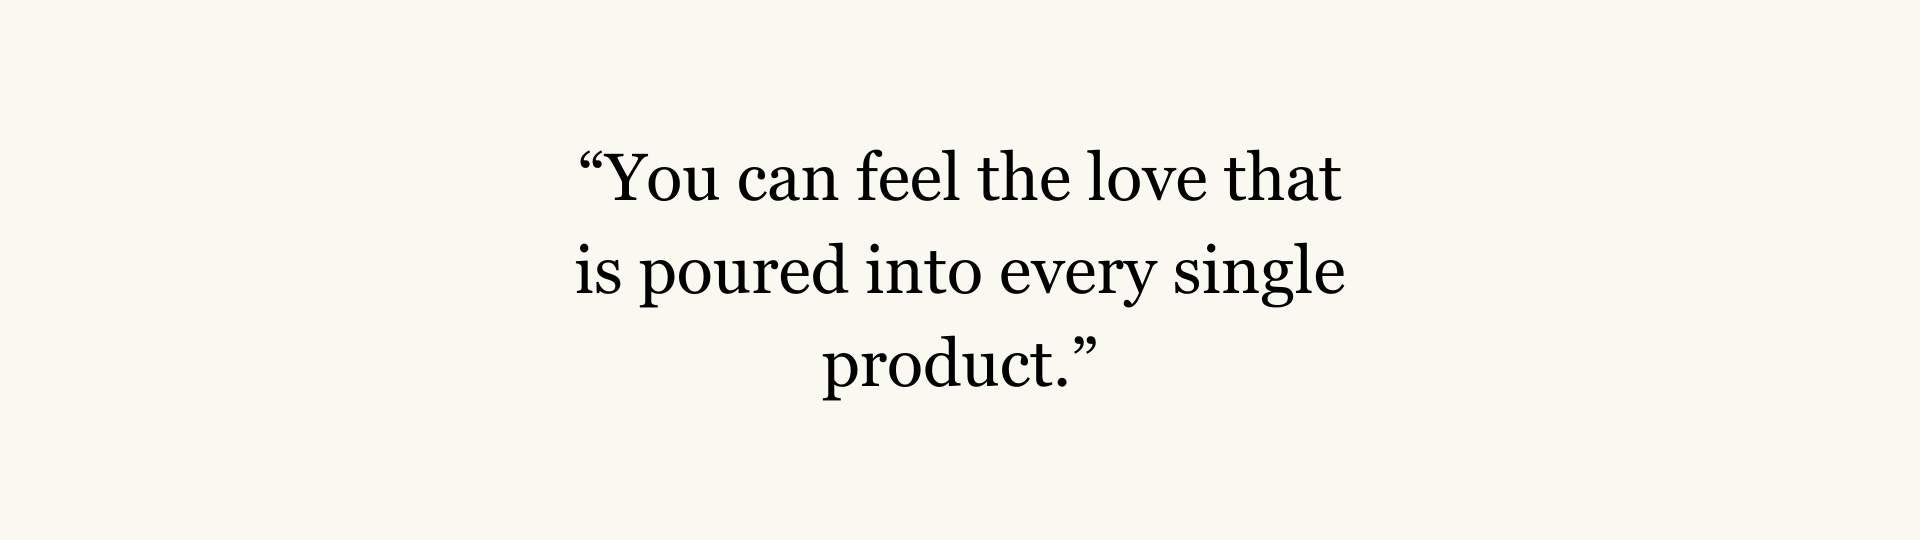 A slide that reads “You can feel the love that is poured into every single product.”